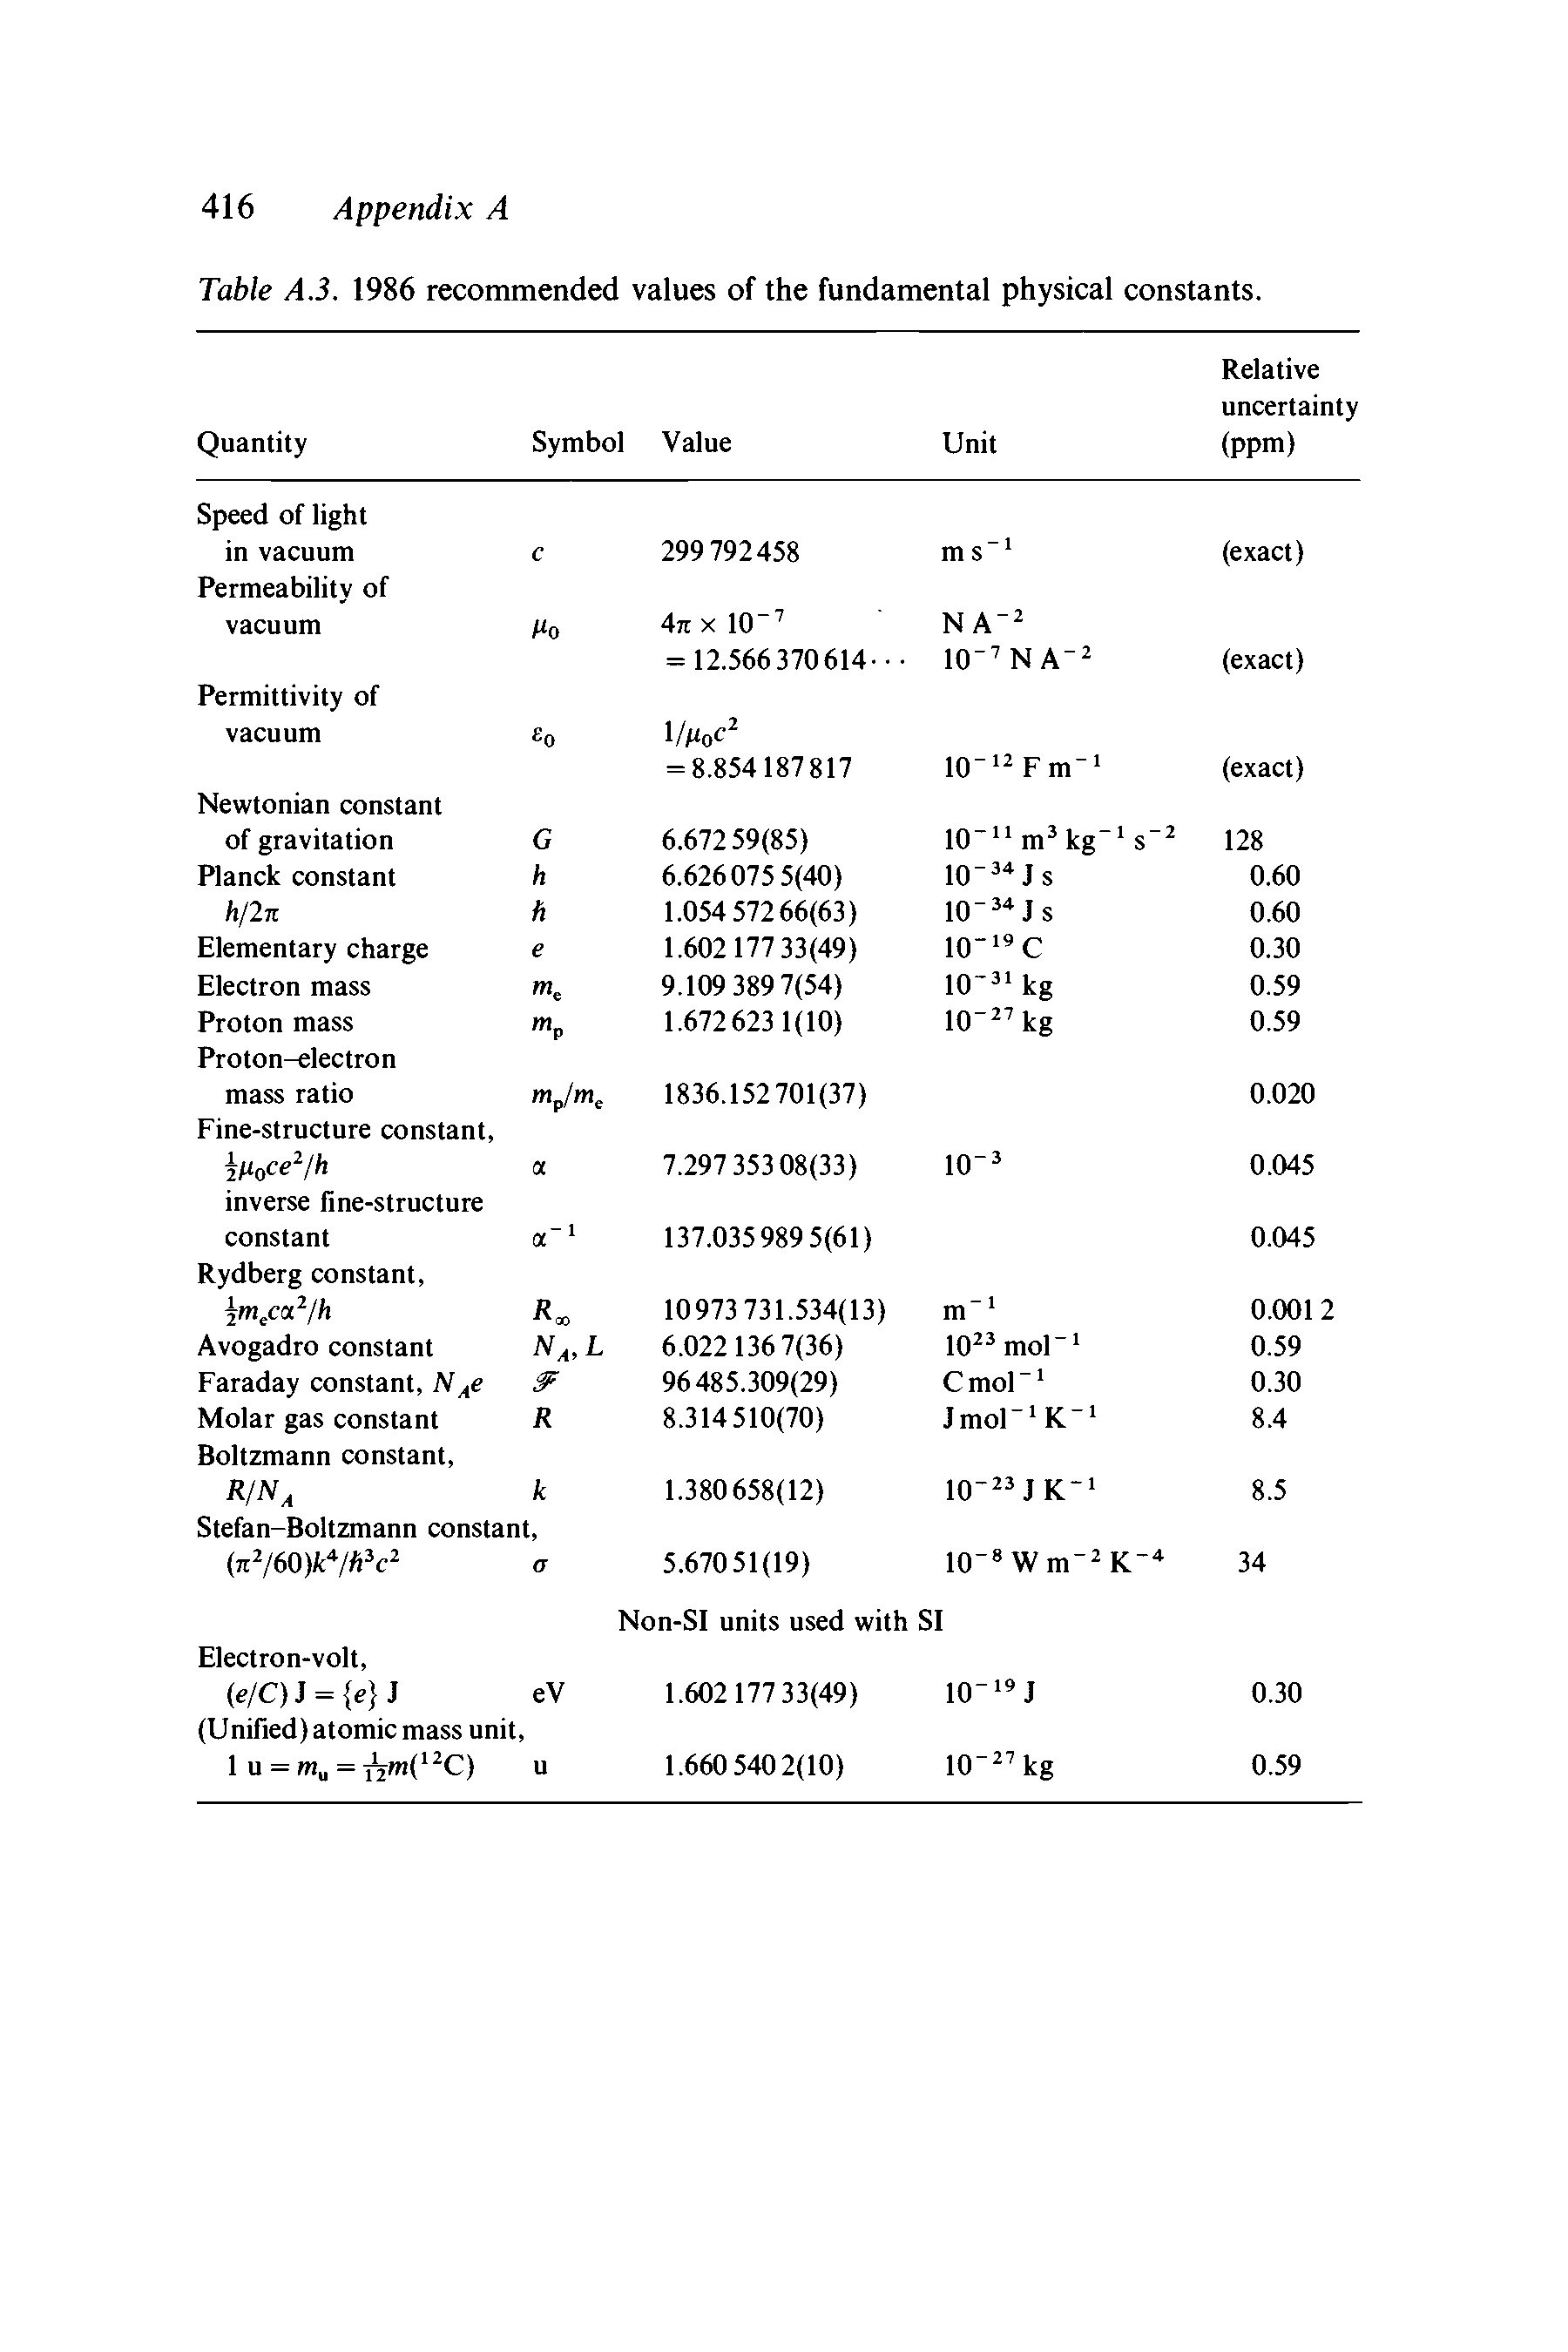 Table A.3. 1986 recommended values of the fundamental physical constants.